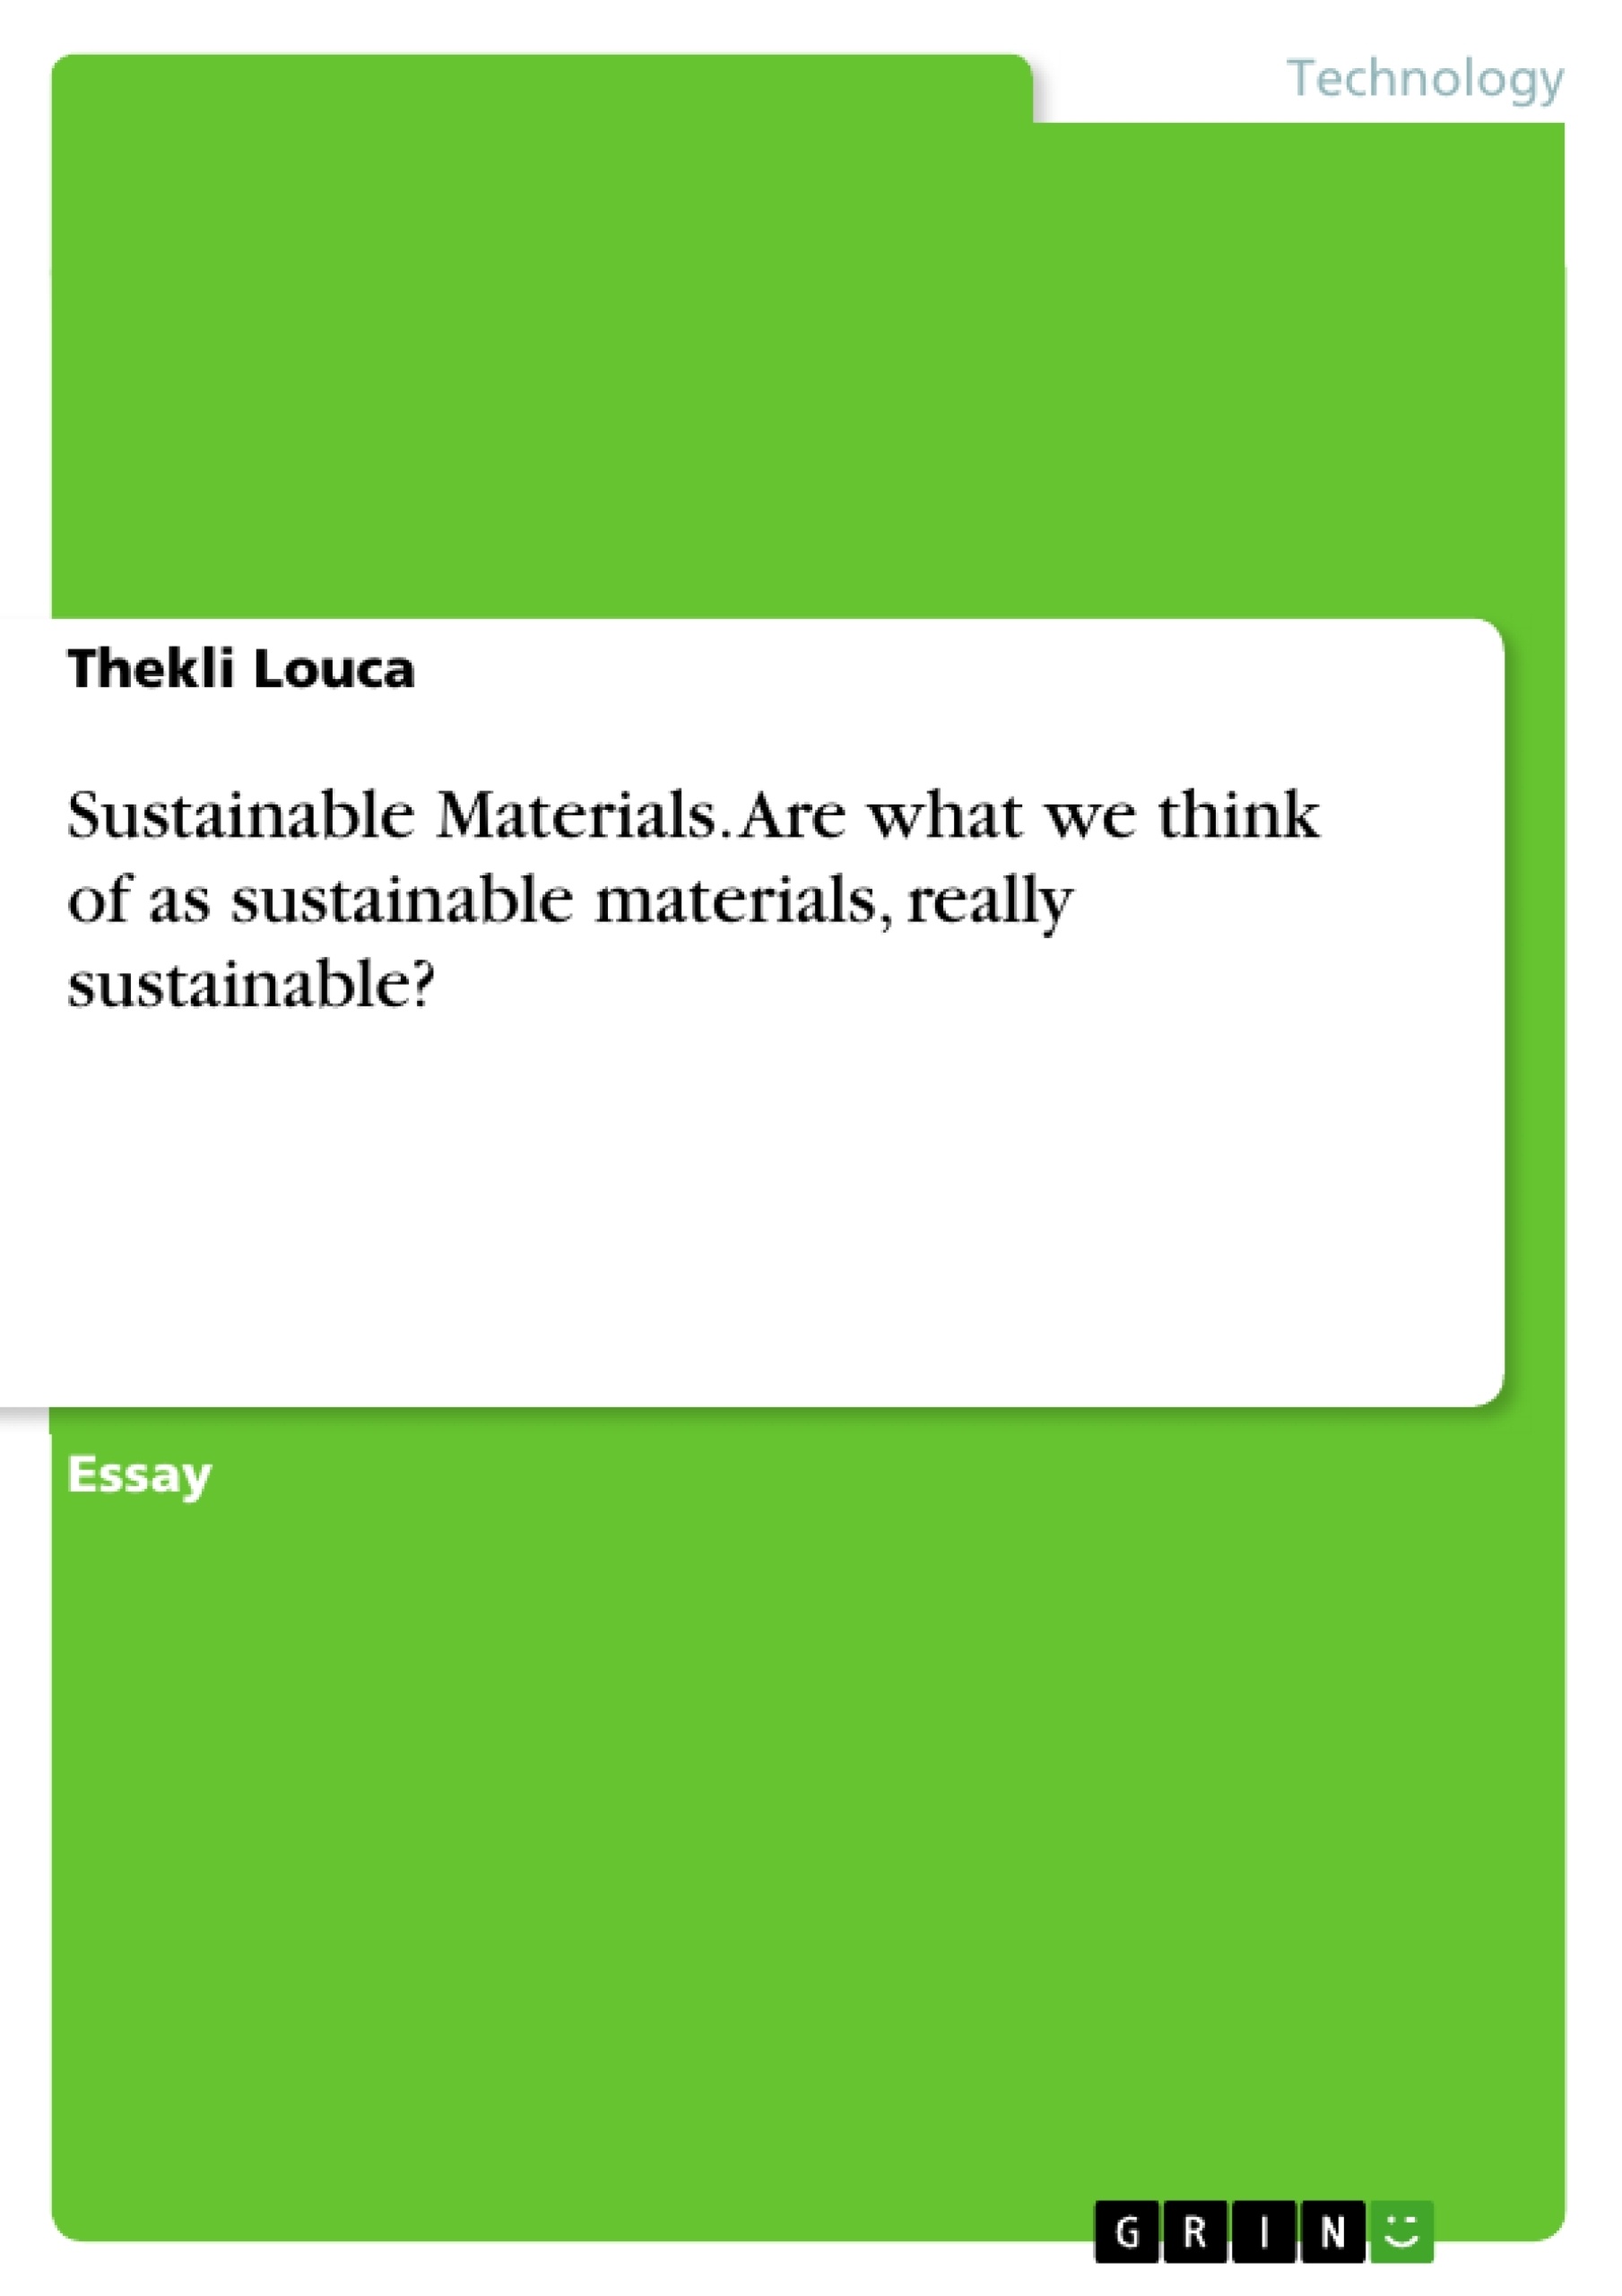 Título: Sustainable Materials. Are what we think of as sustainable materials, really sustainable?